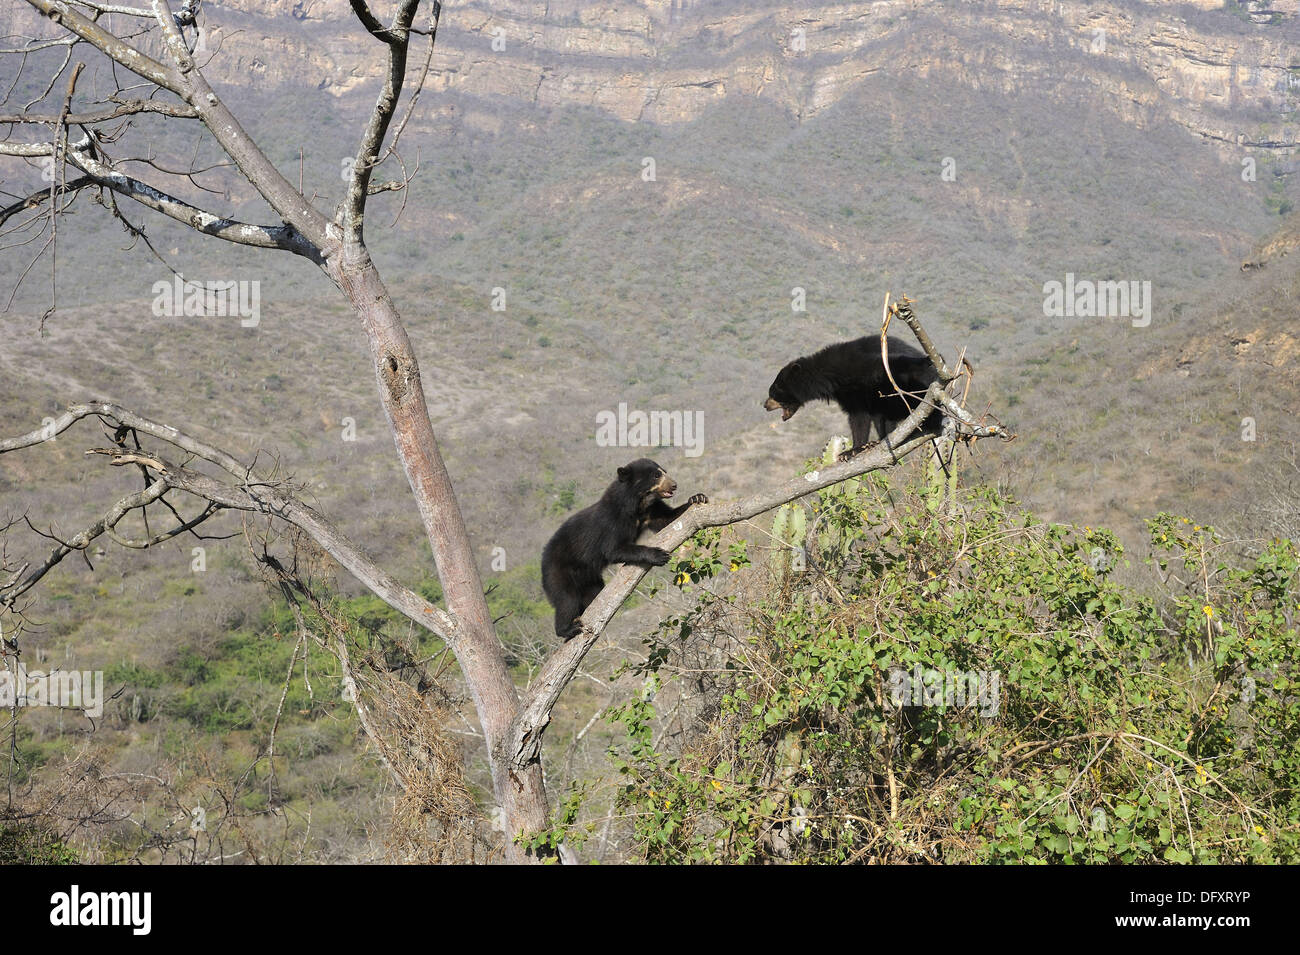 Encounter between two spectacled bears (Tremarctos ornatus) climbing in tree, Chaparri Ecological Reserve, Peru, South America Stock Photo